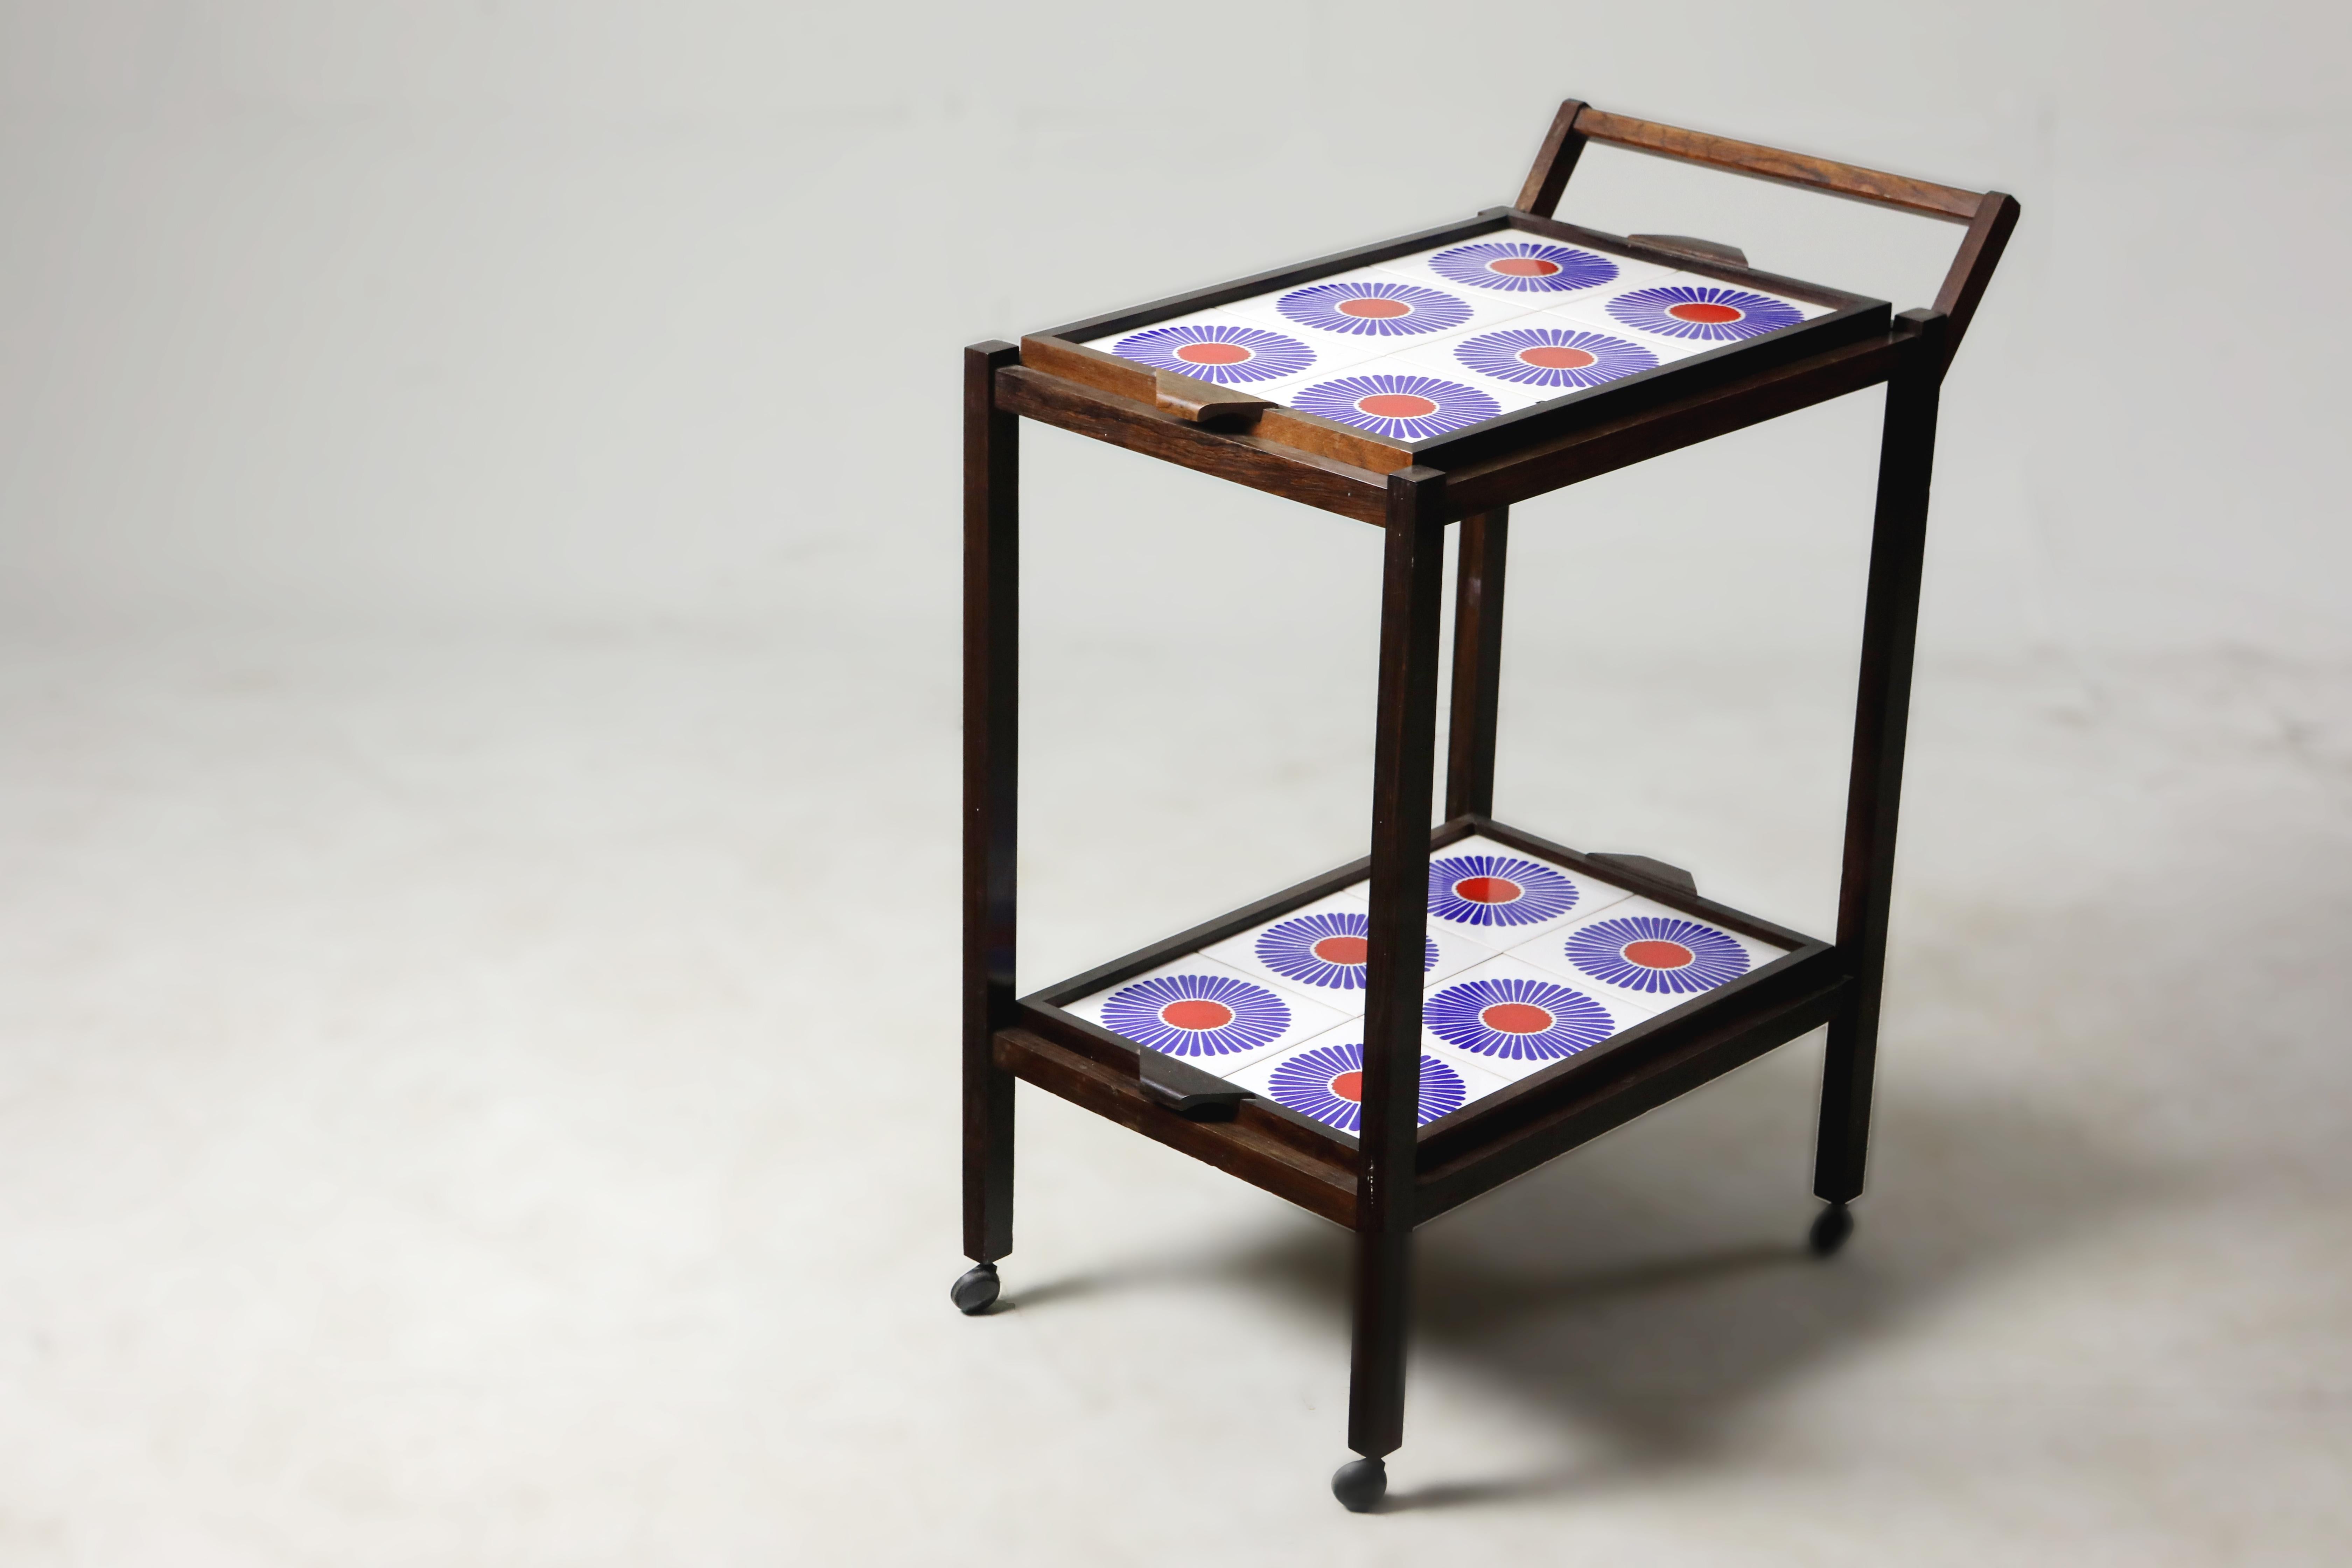 Brazilian Mid-Century Modern Tiled Tea-Cart with Removable Trays, Brazil, 1960s In Good Condition For Sale In Deerfield Beach, FL